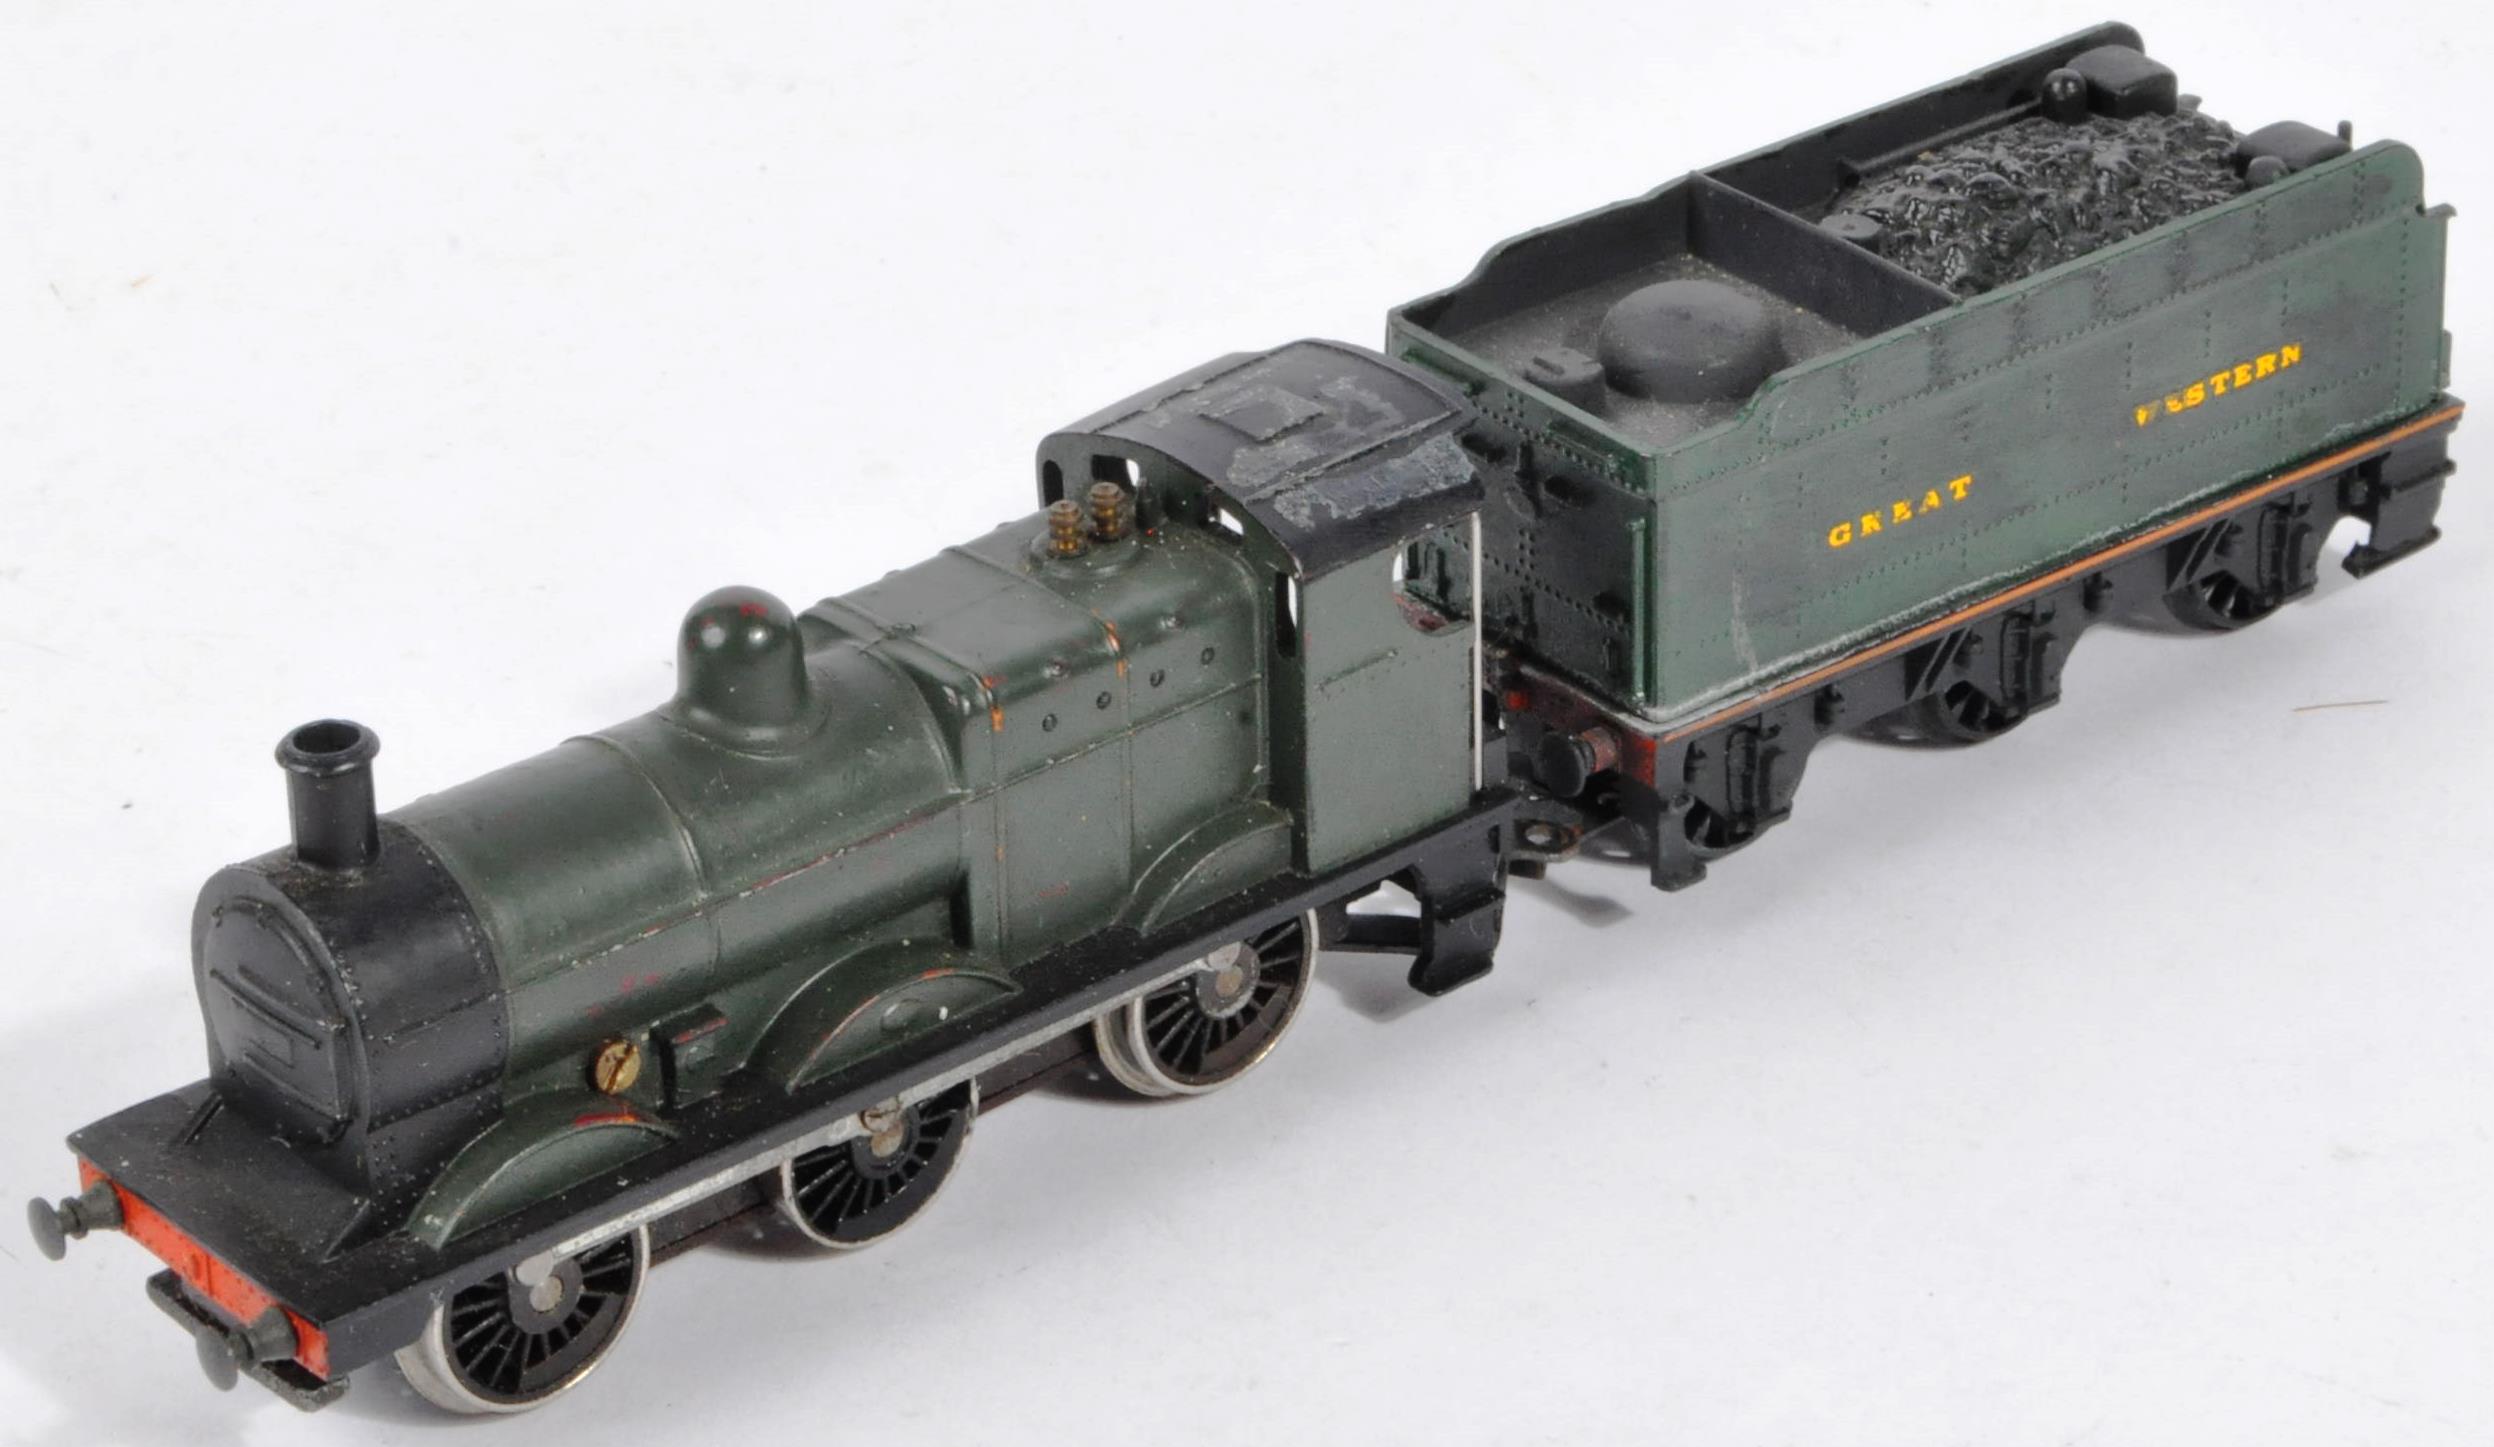 COLLECTION OF HORNBY / TRIANG TRAIN SET LOCOMOTIVE ENGINES - Image 7 of 8